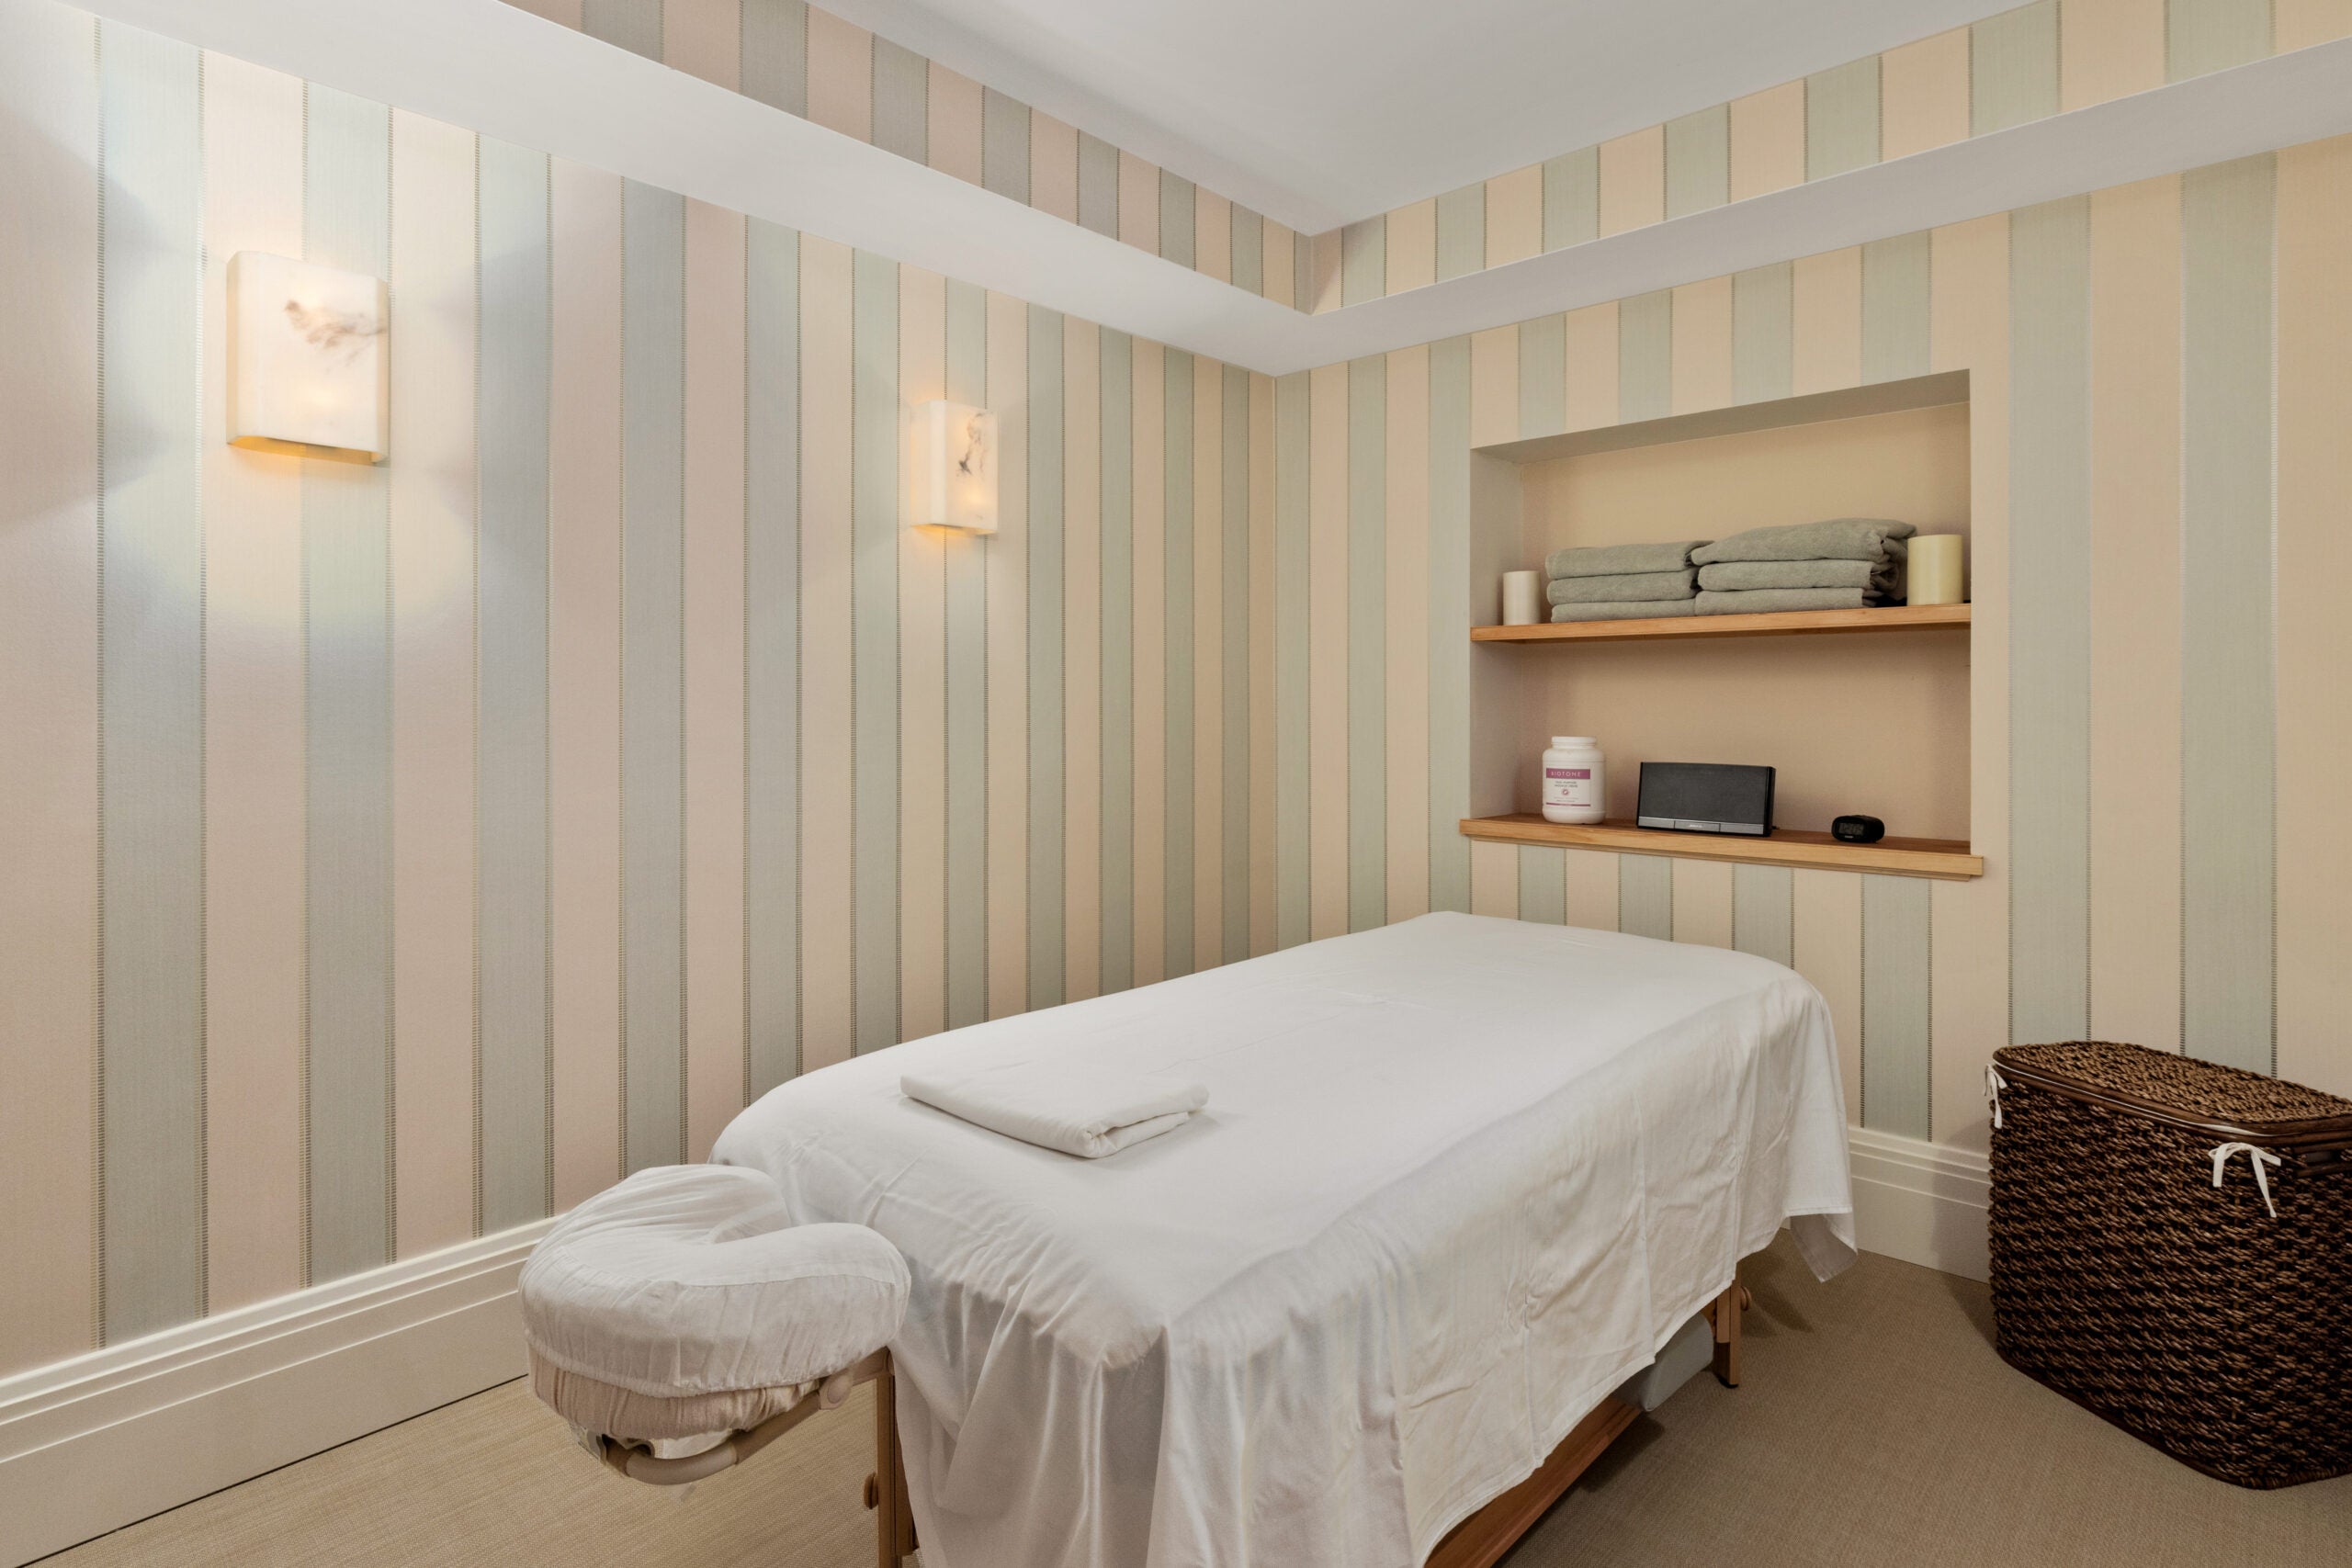 The massage room, which has box sconces, a massage table with white linen, a whicker basket, and shelves holding white candles and green towels. The wallpaper in this space is green and cream stripes. The floor is carpeted.